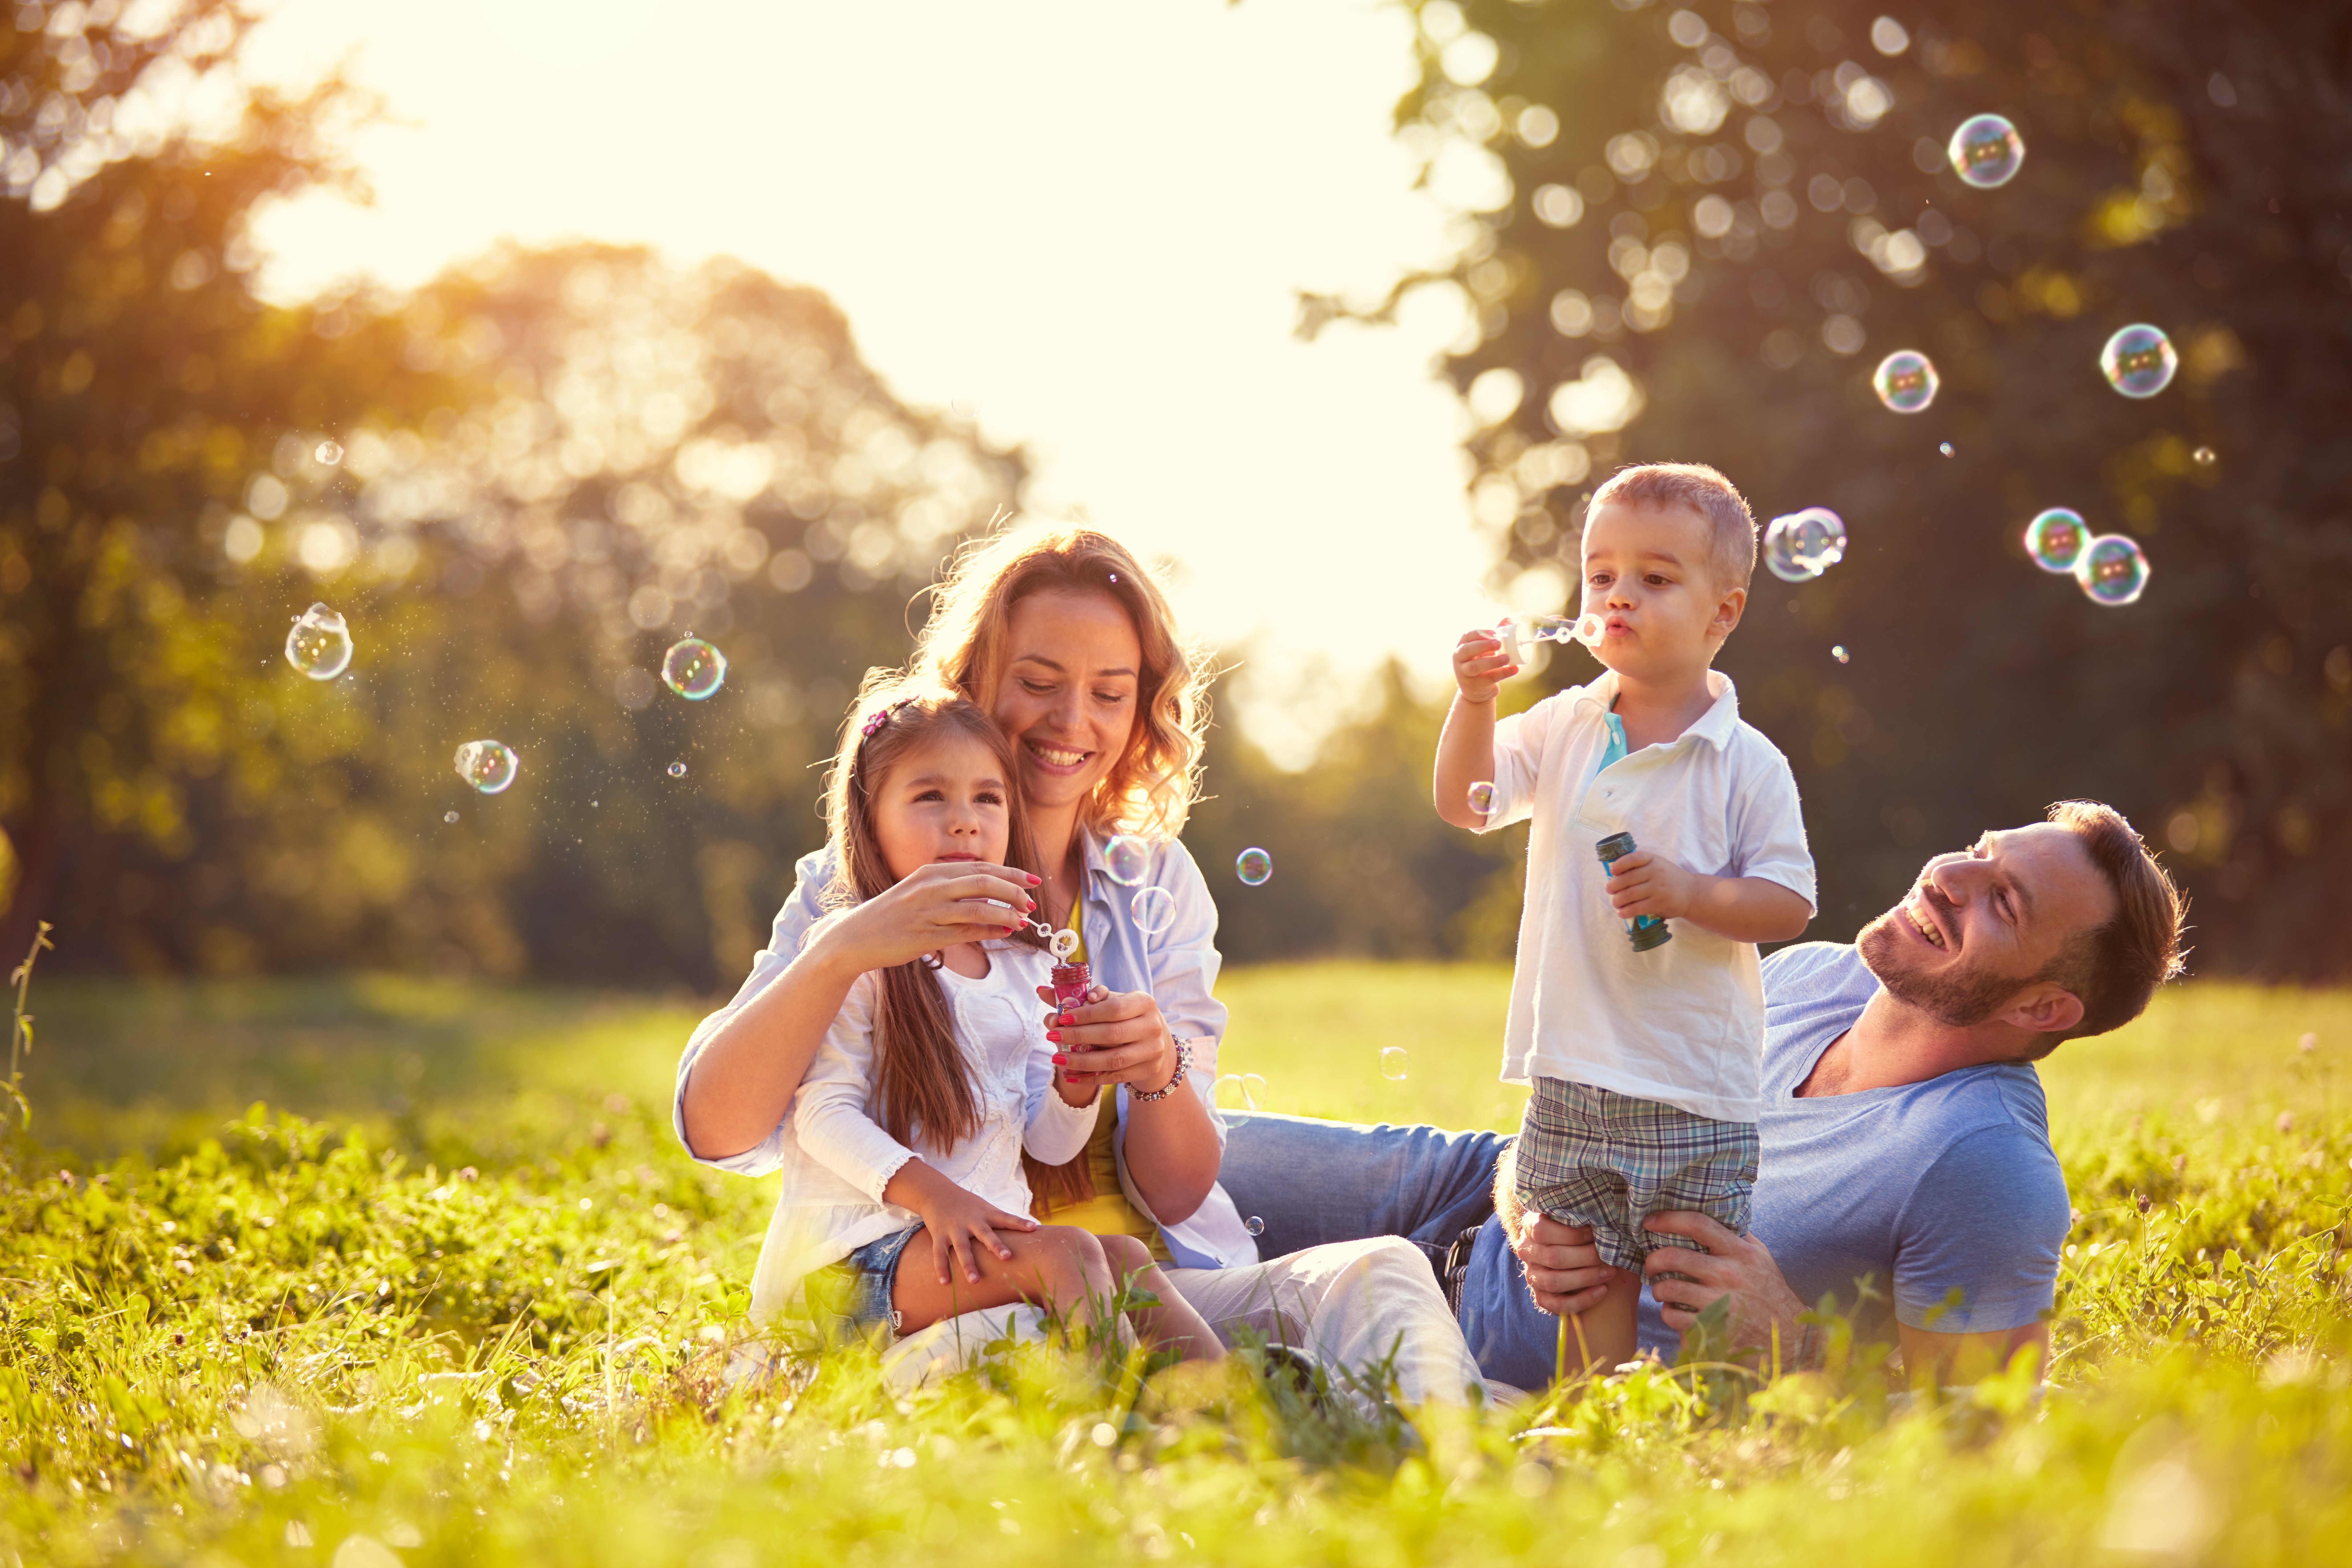 A happy family blowing bubbles. │Source: Shutterstock